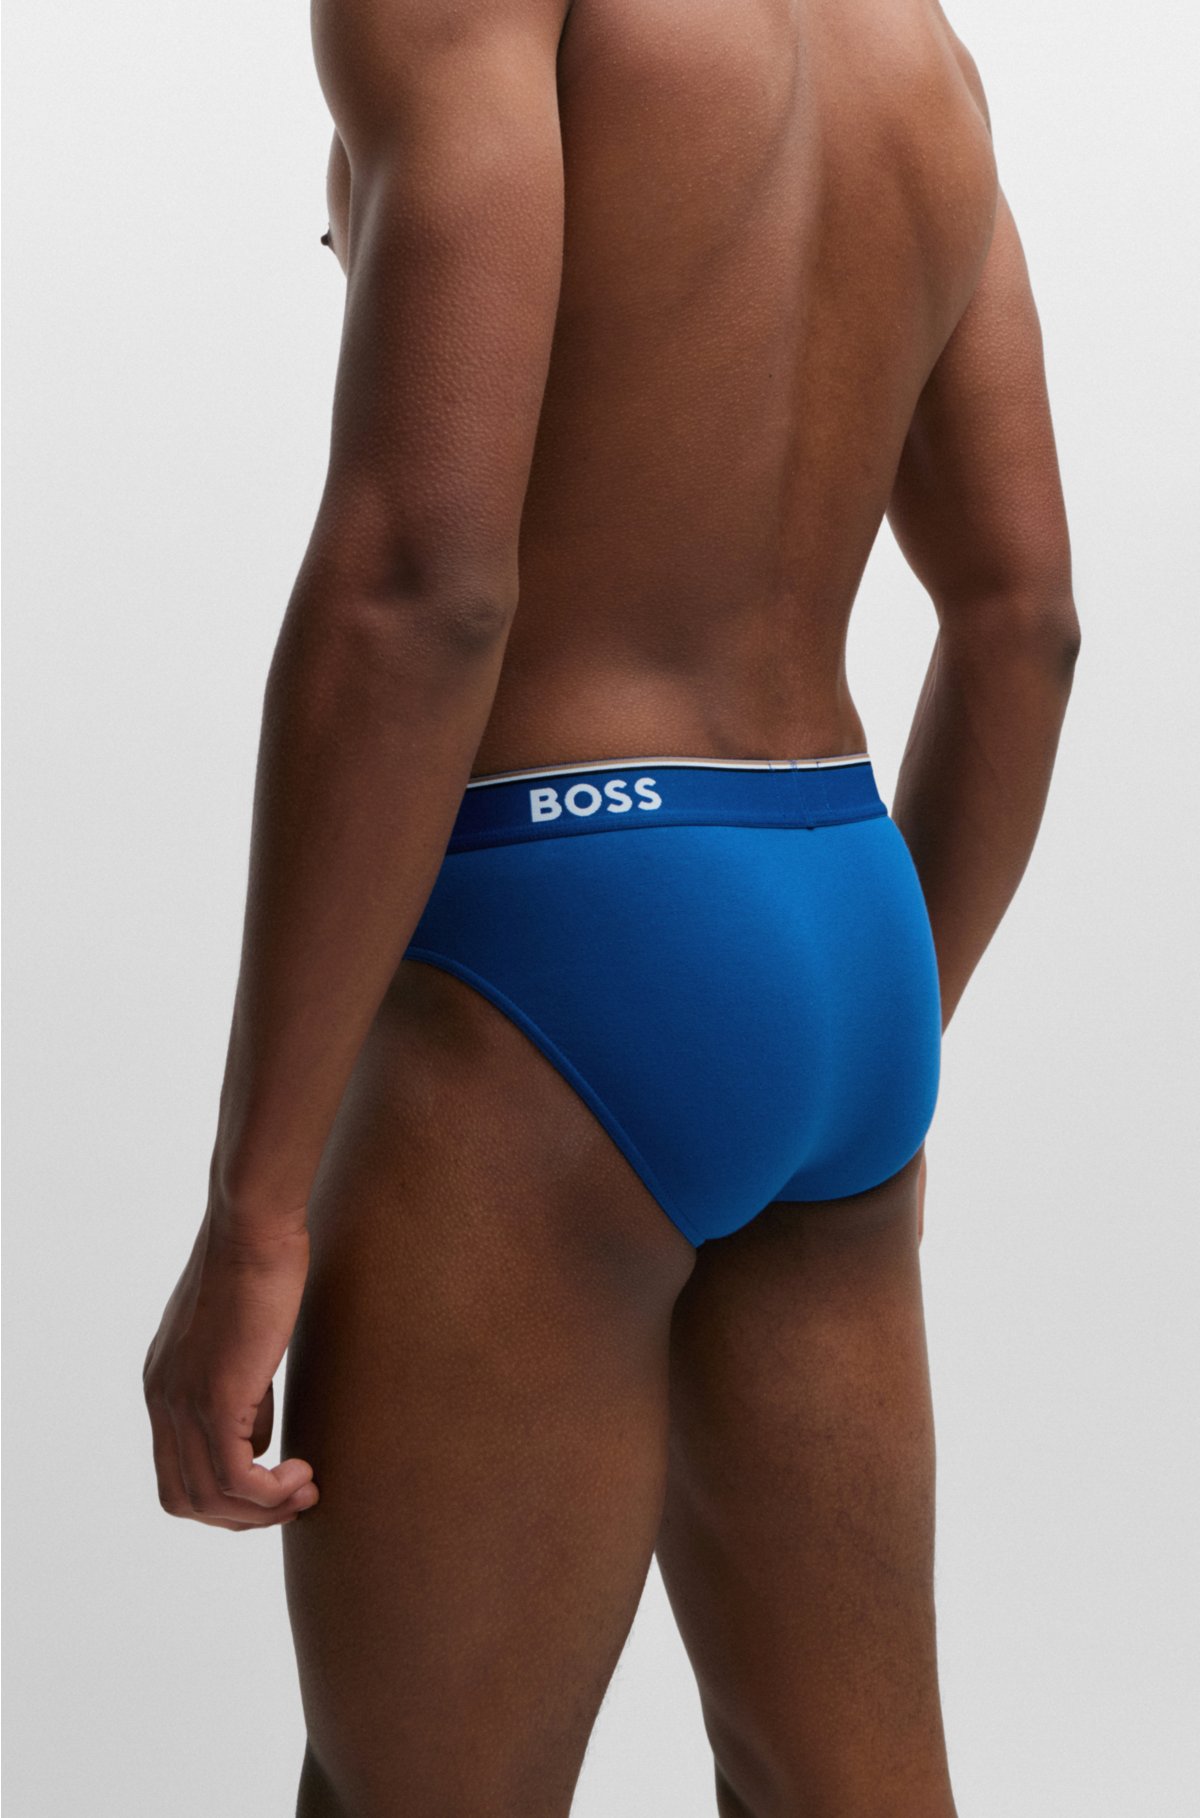 stretch-cotton Three-pack - logo with of BOSS waistbands briefs